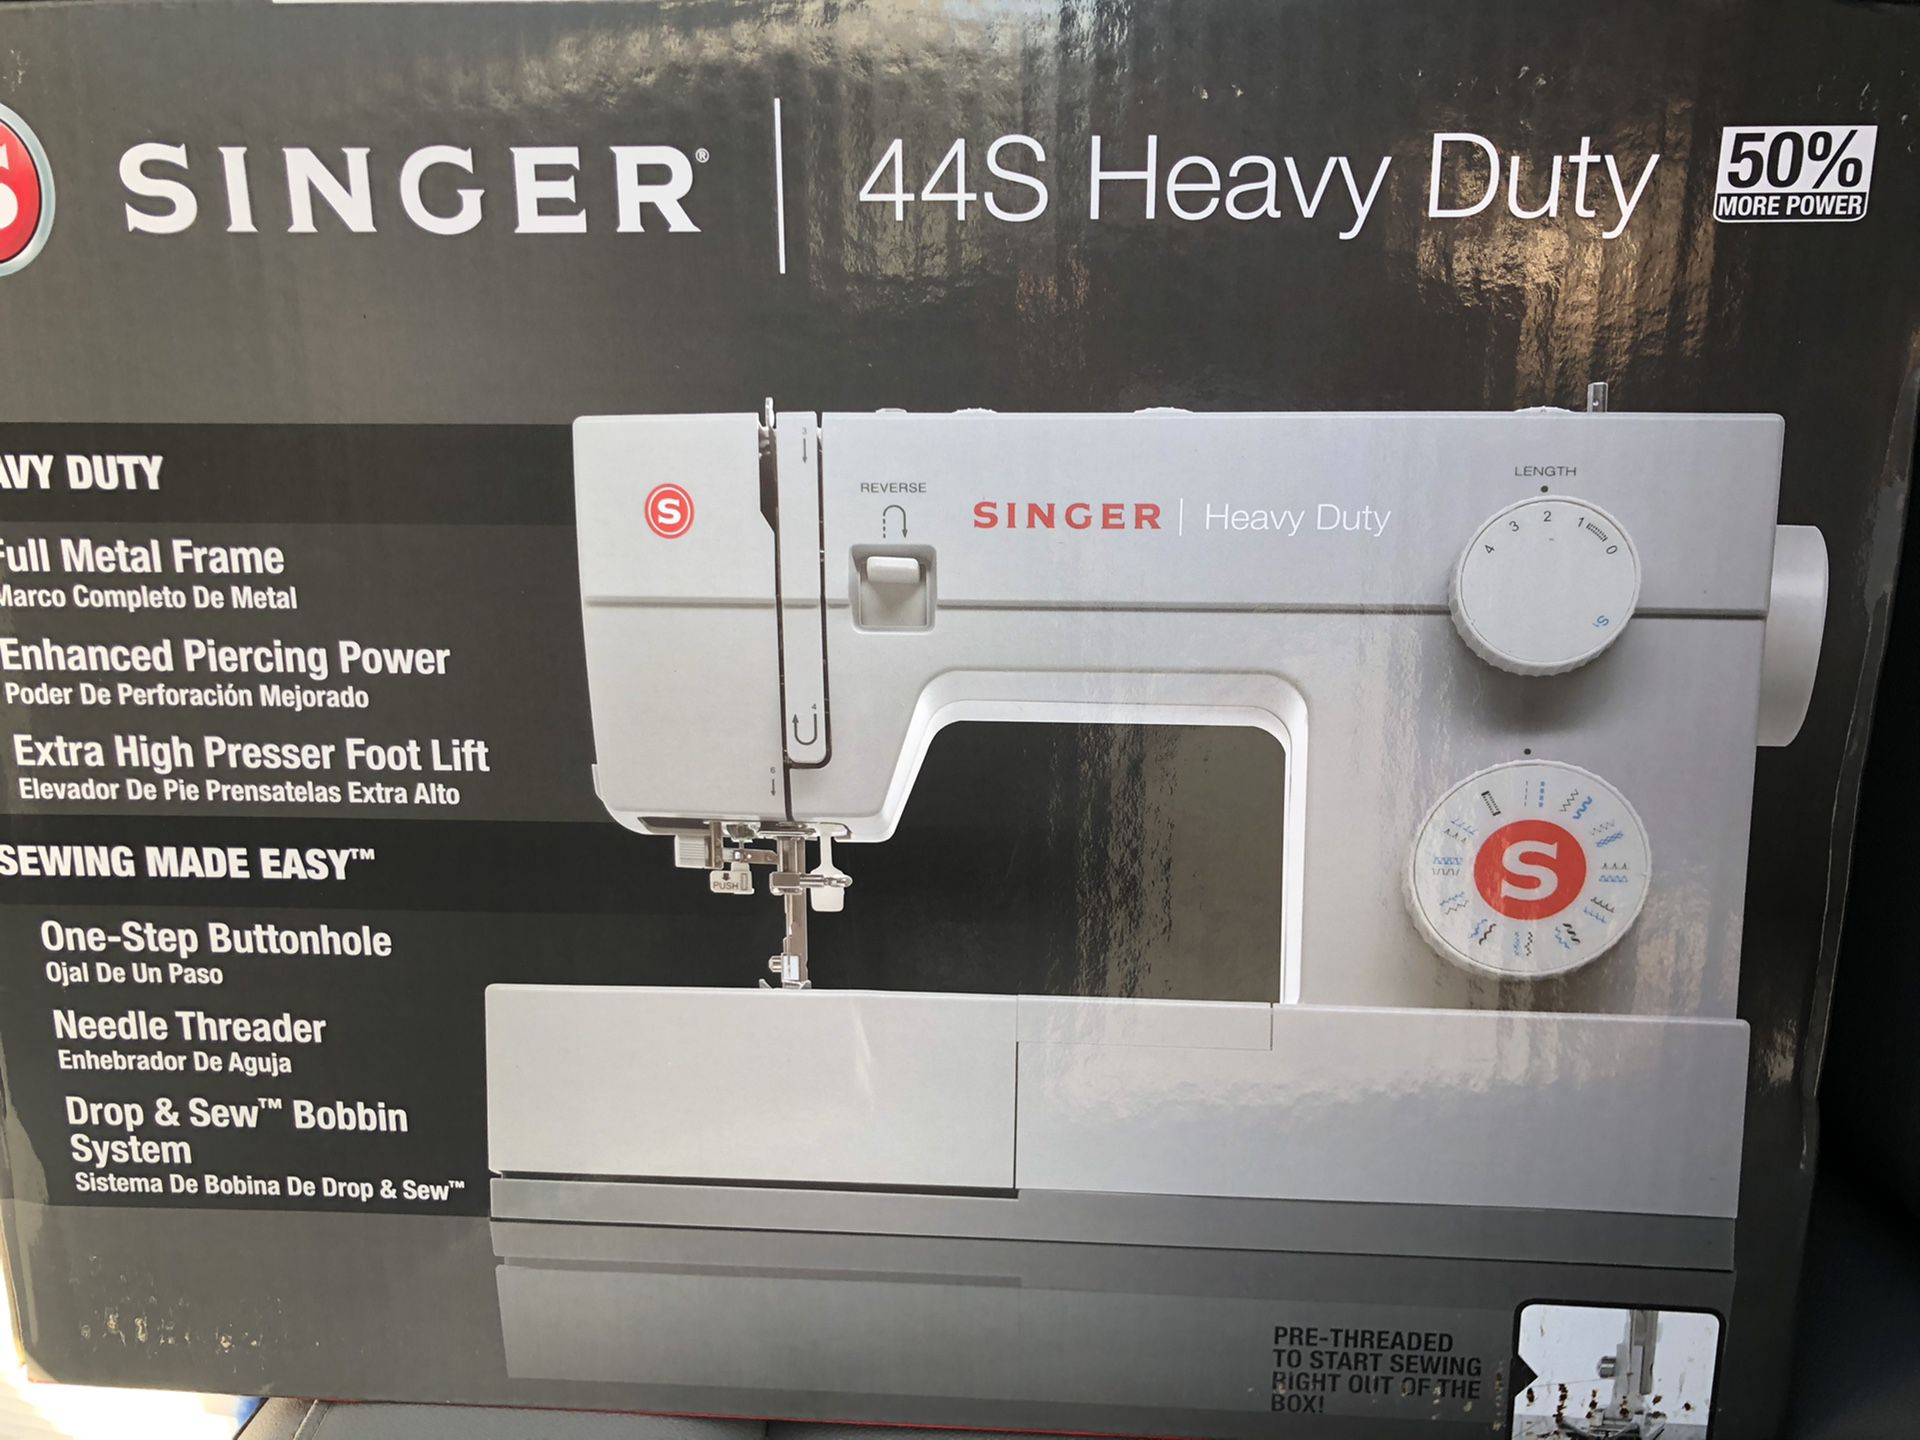 New in box Singer 44s Heavy Duty Sewing Machine